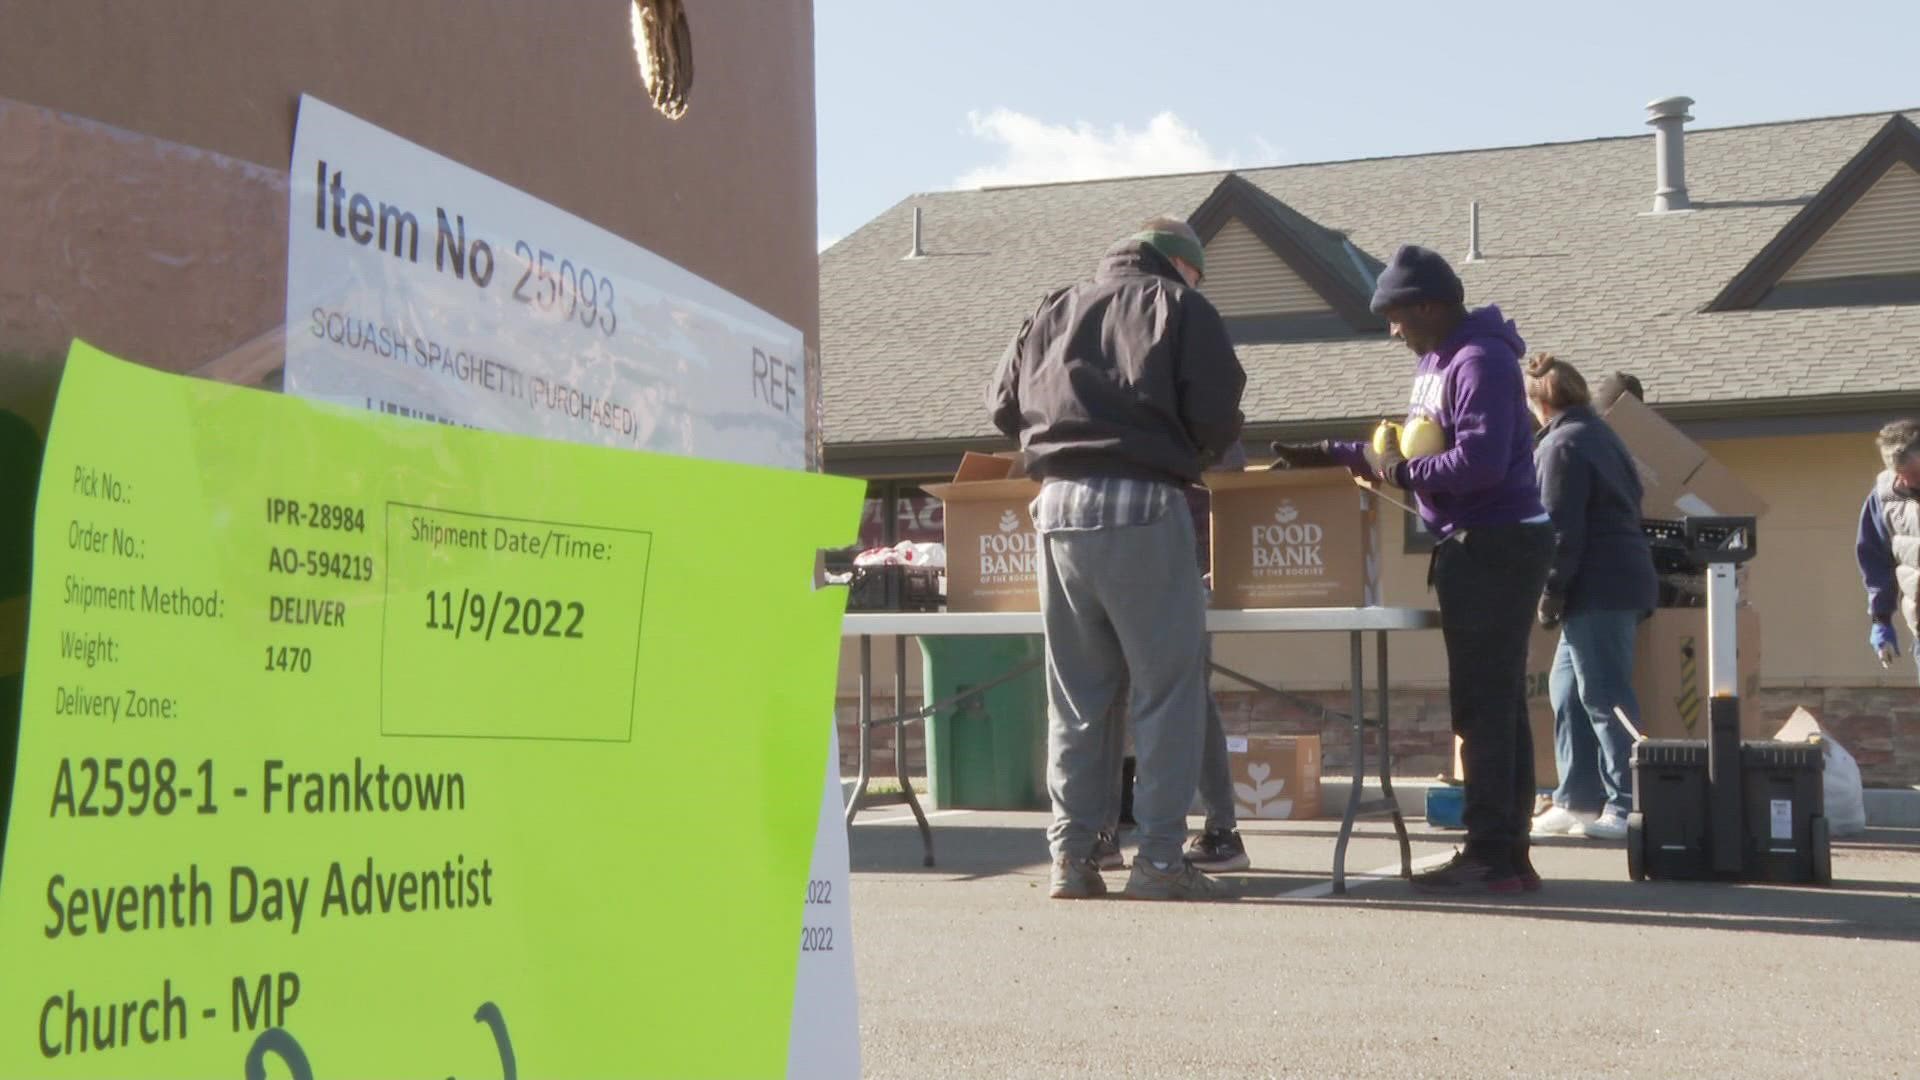 Food Bank of the Rockies sets up 70 mobile food pantries across Colorado and Wyoming each month. It's a way to get groceries to people in rural areas or food deserts